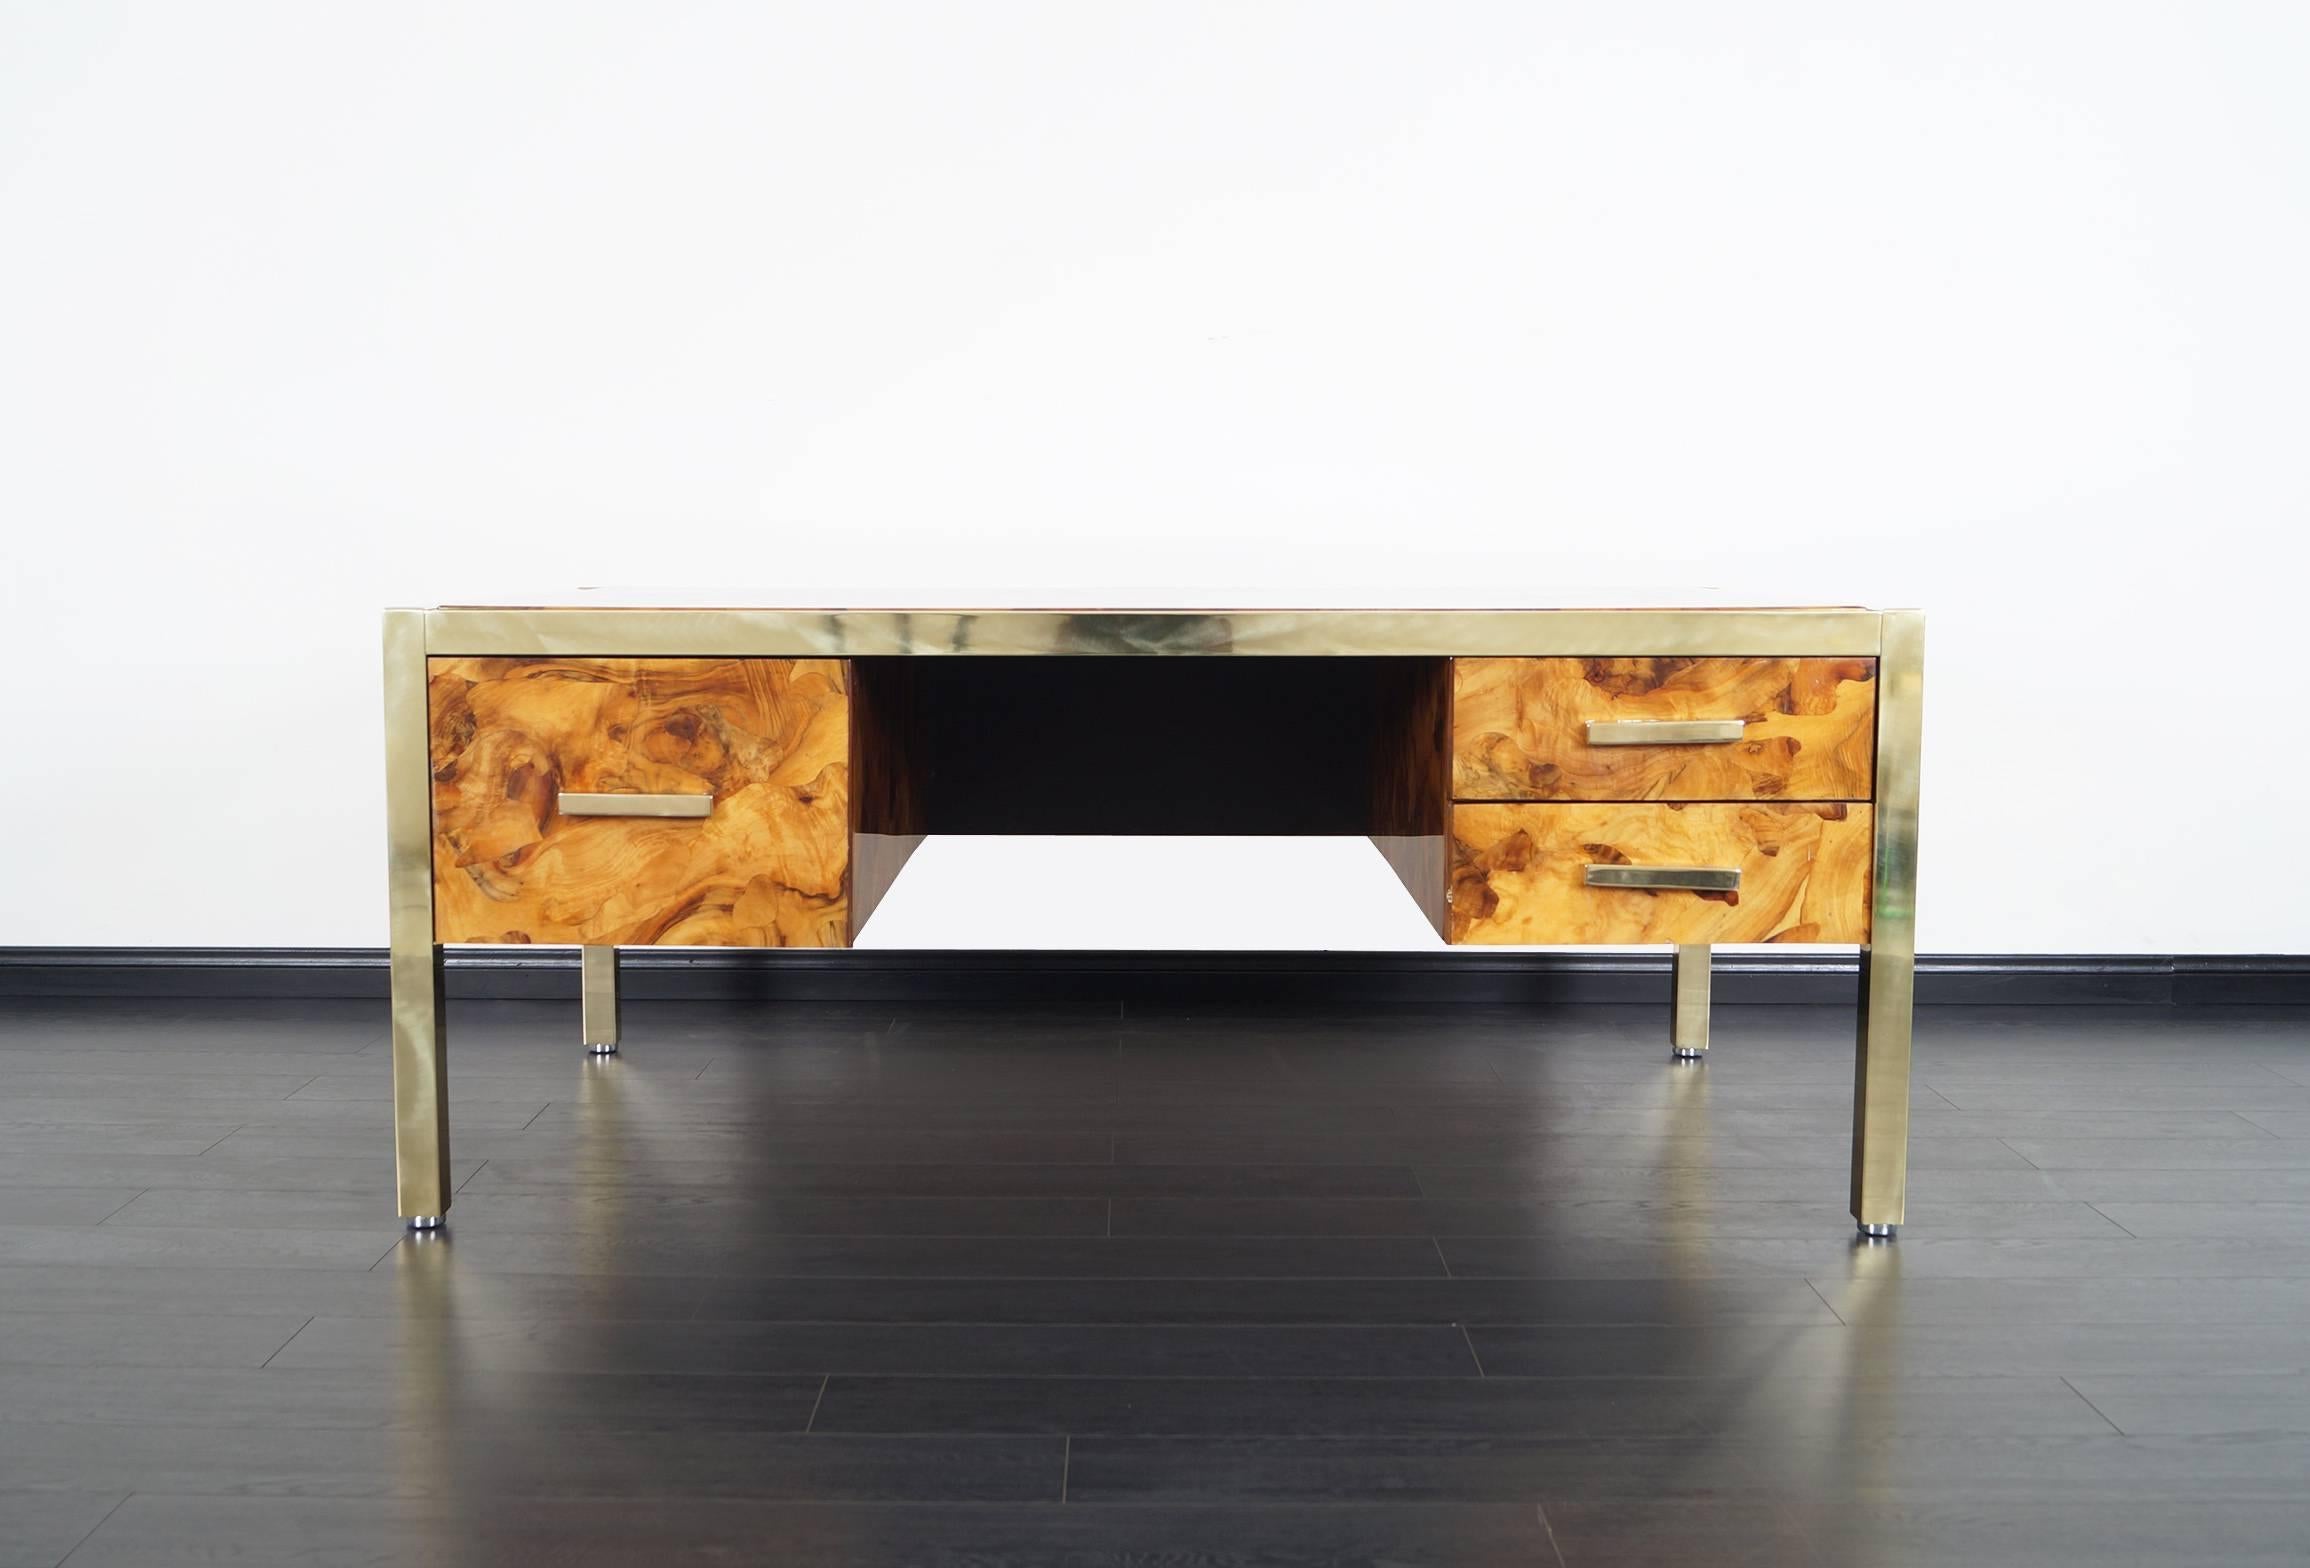 Monumental executive burl wood desk designed by Pace Collection. This desk is just stunning! Top quality craftsmanship.